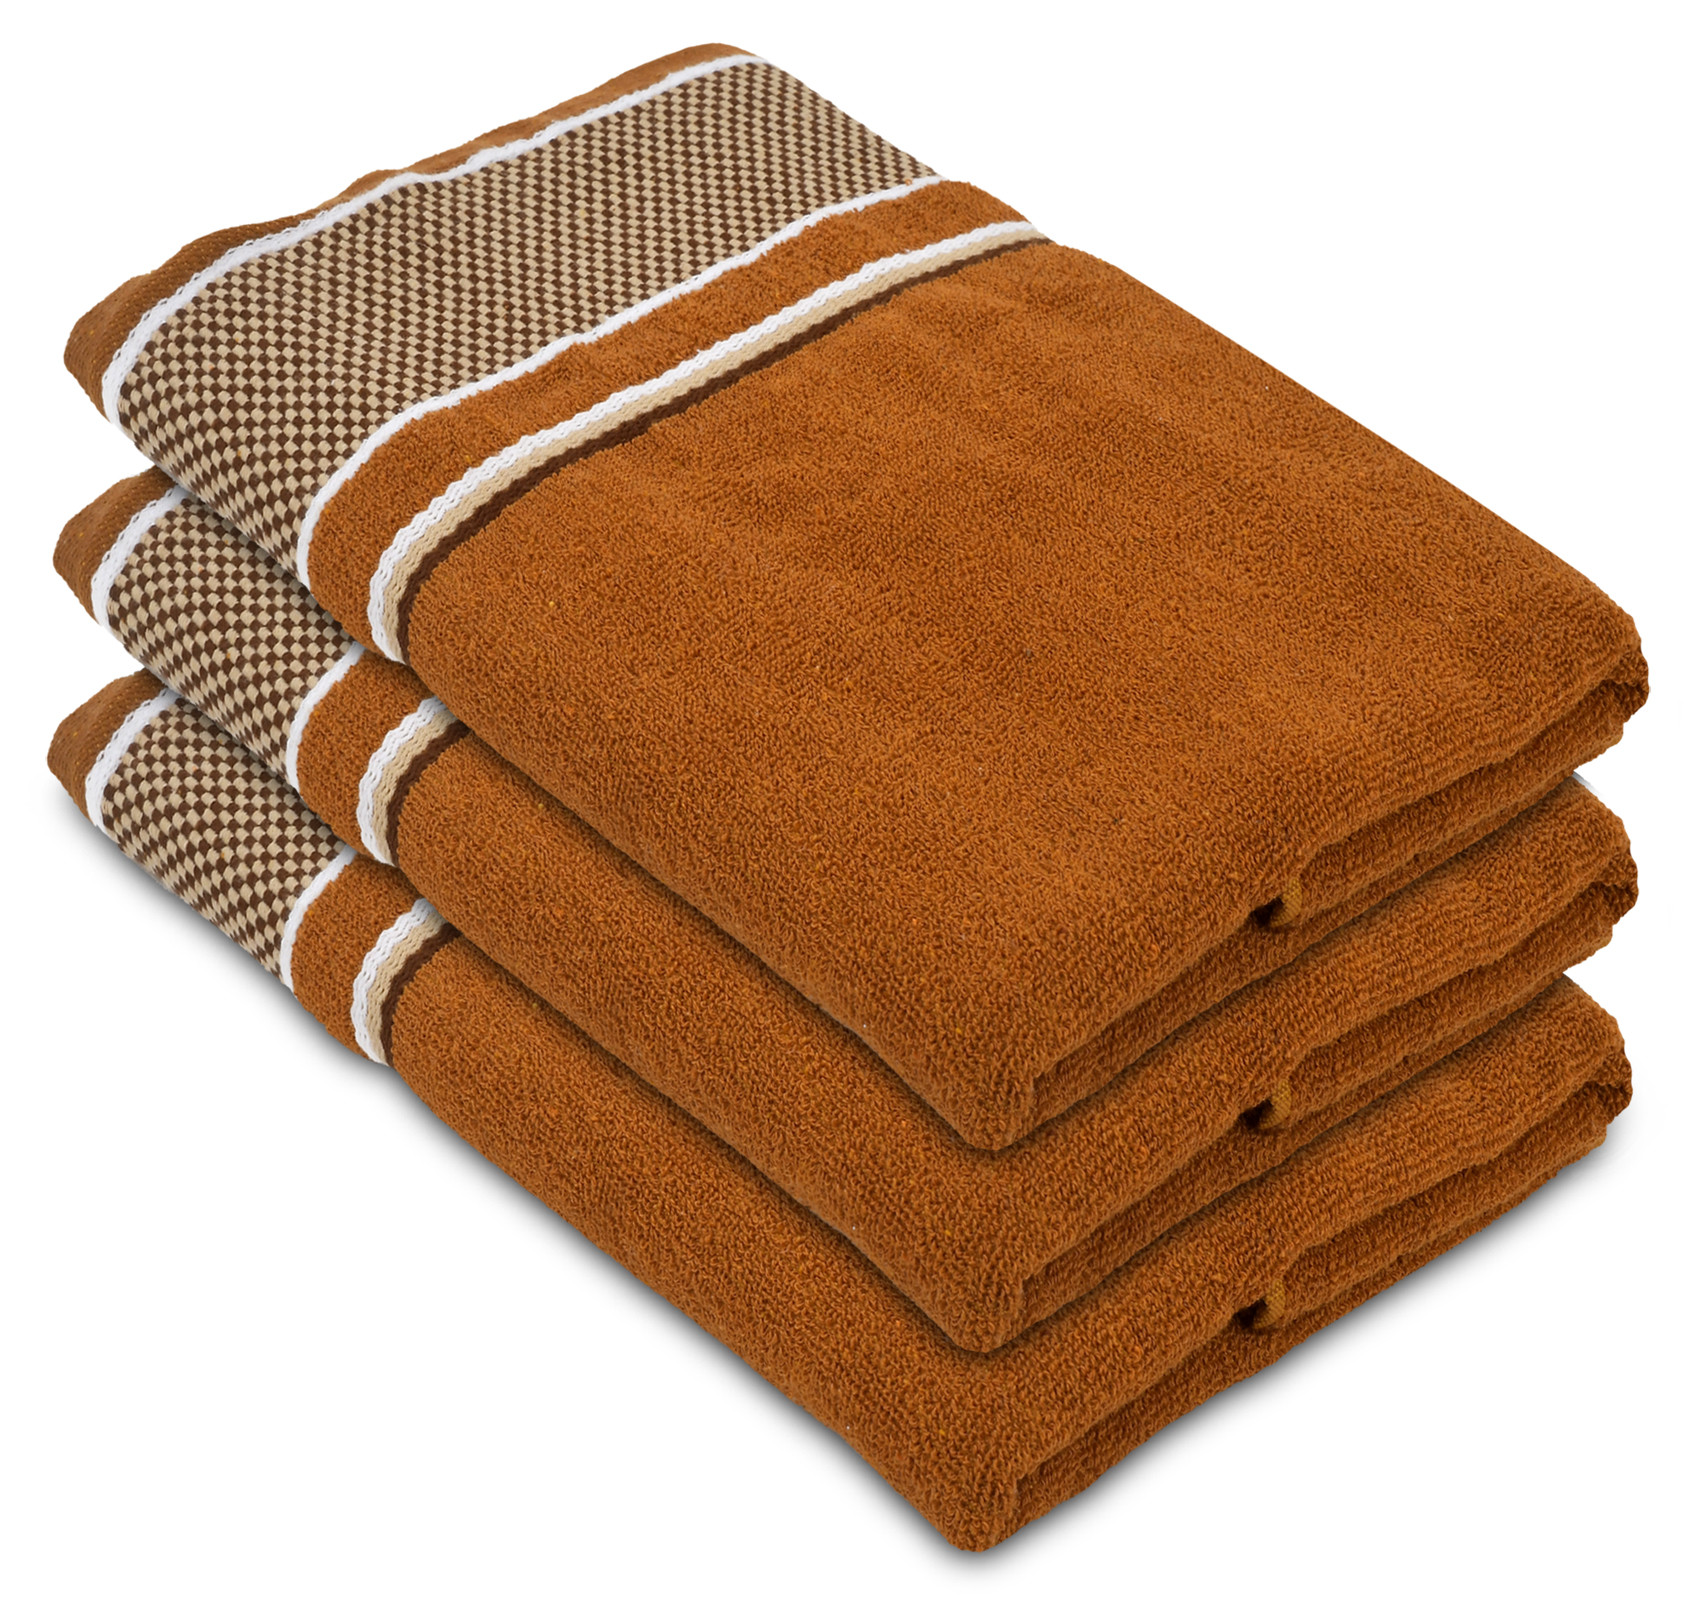 Kuber Industries Luxurious, Soft Cotton Bath Towel With Check Border, 30